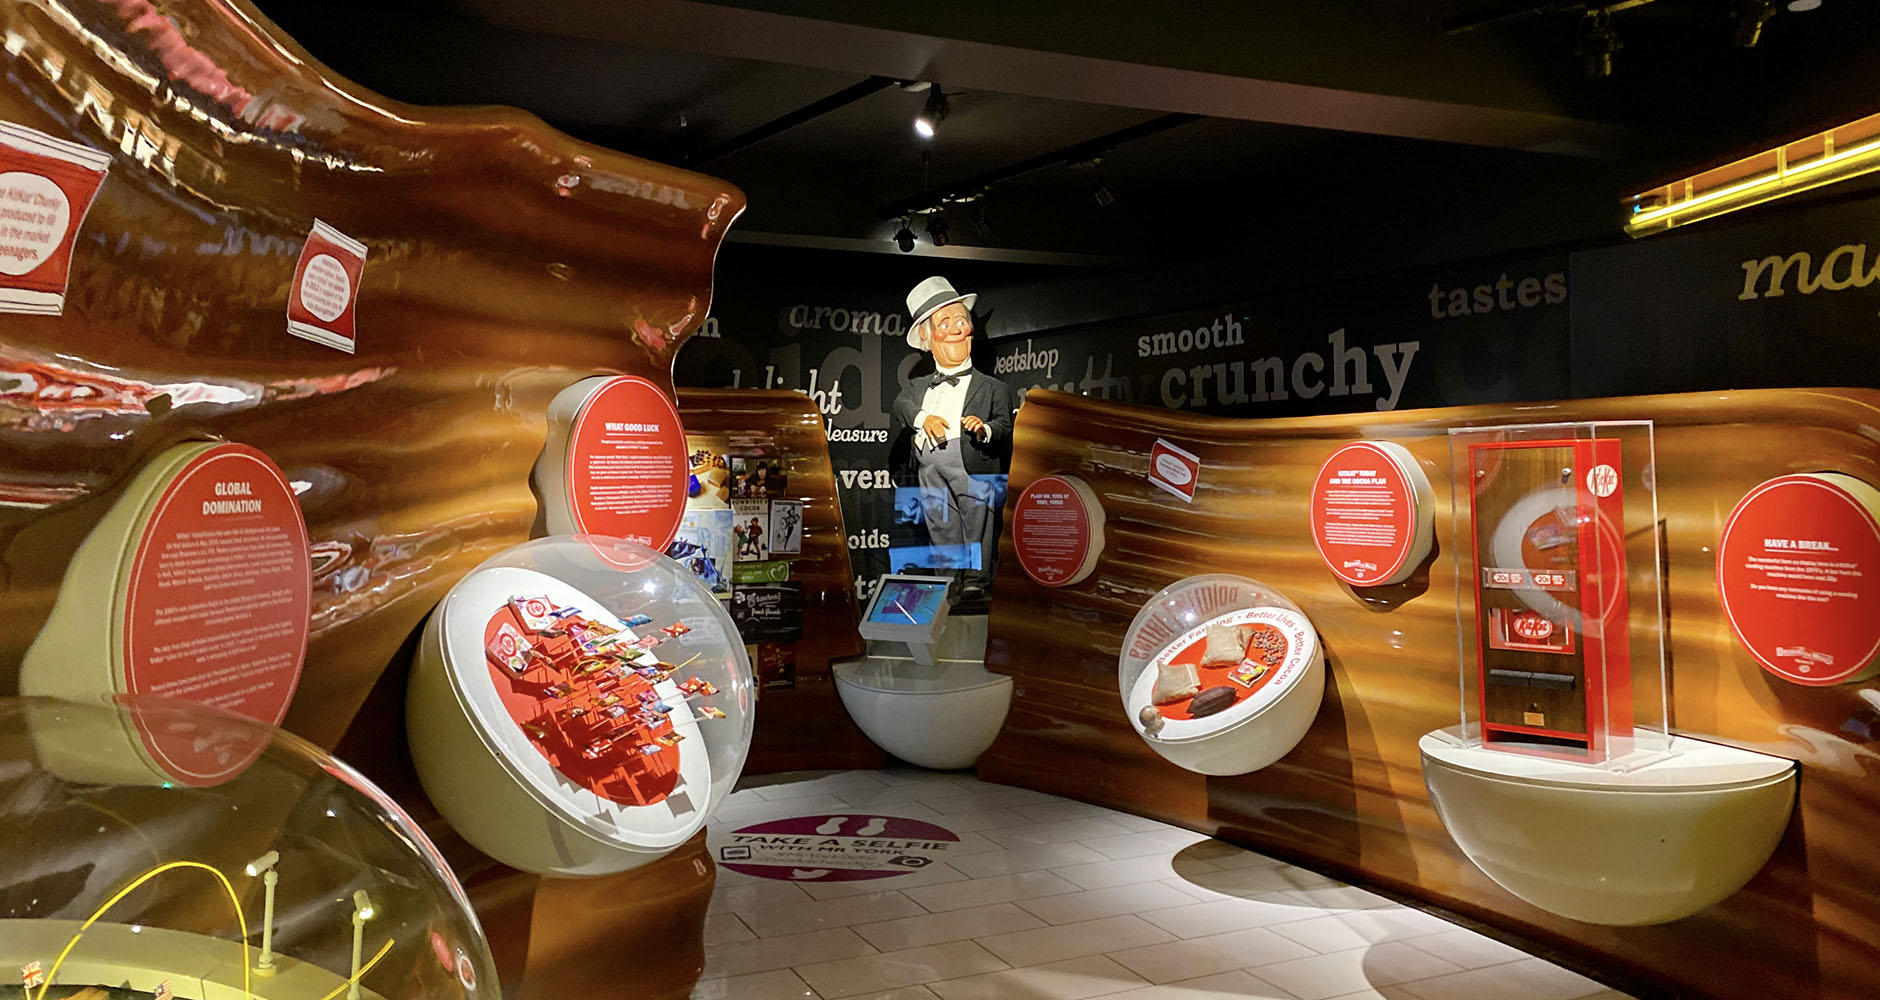 The KitKat exhibition at York's Chocolate Story